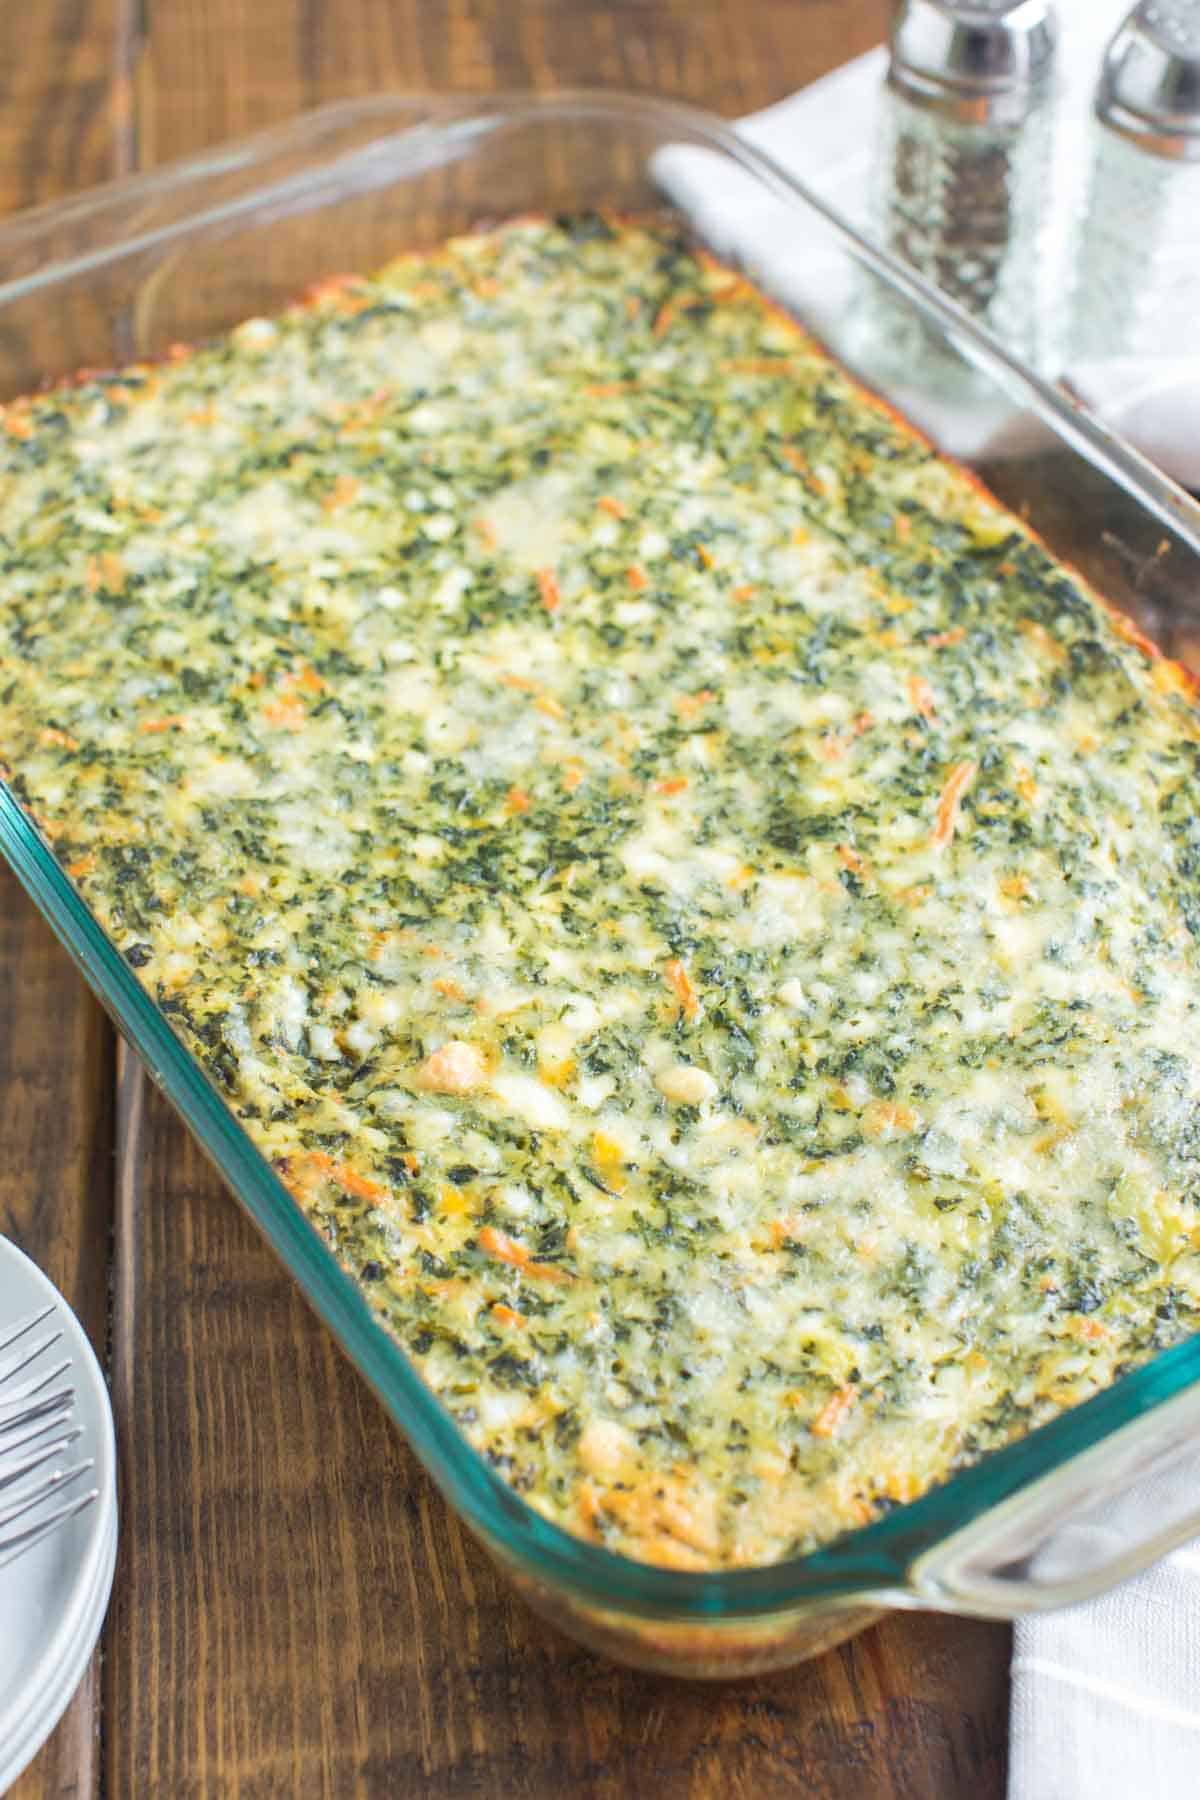 Carrot and Spinach Breakfast Casserole in a glass baking dish